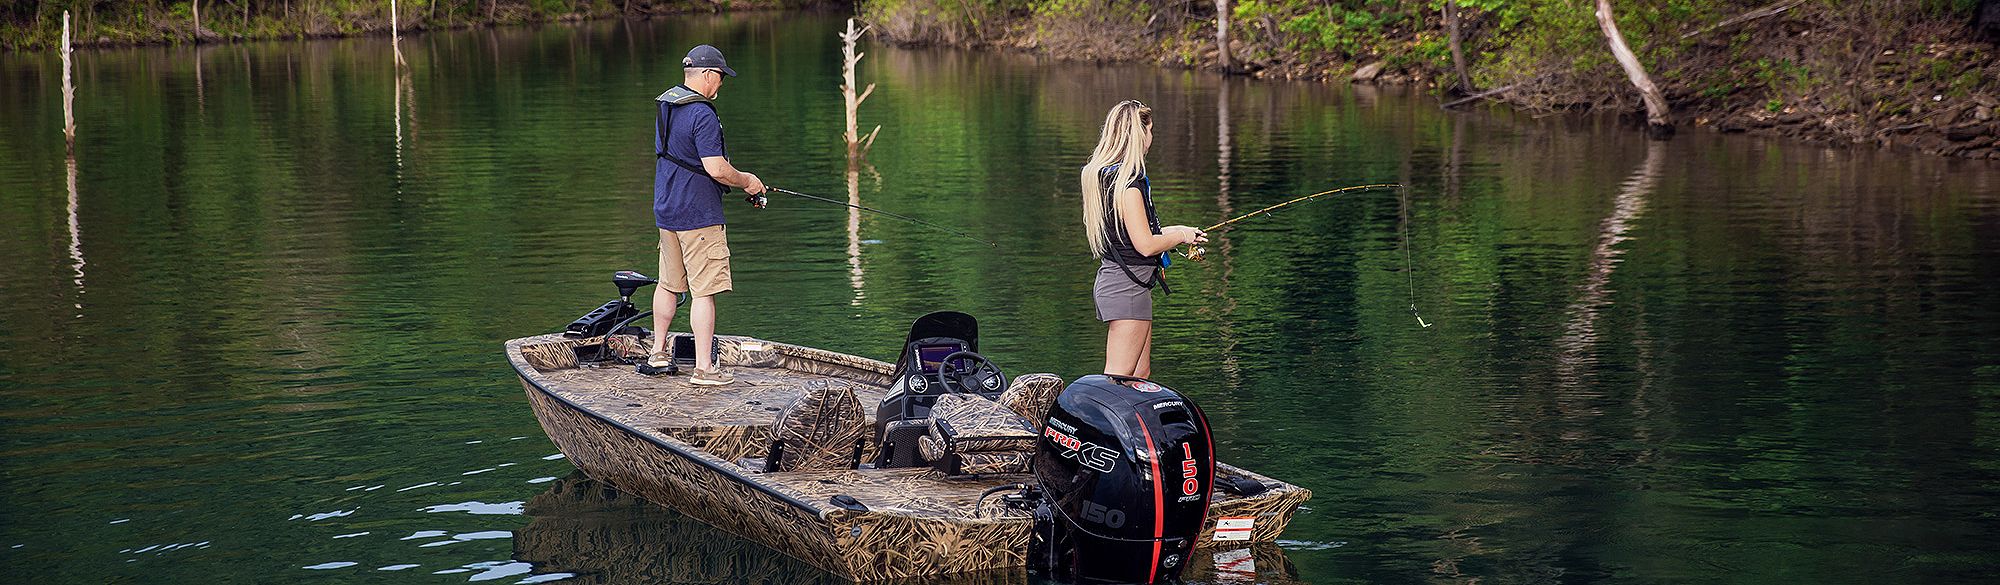 Father and Daughter Fishing on a Lowe Stinger 195 Bass Fishing Boat